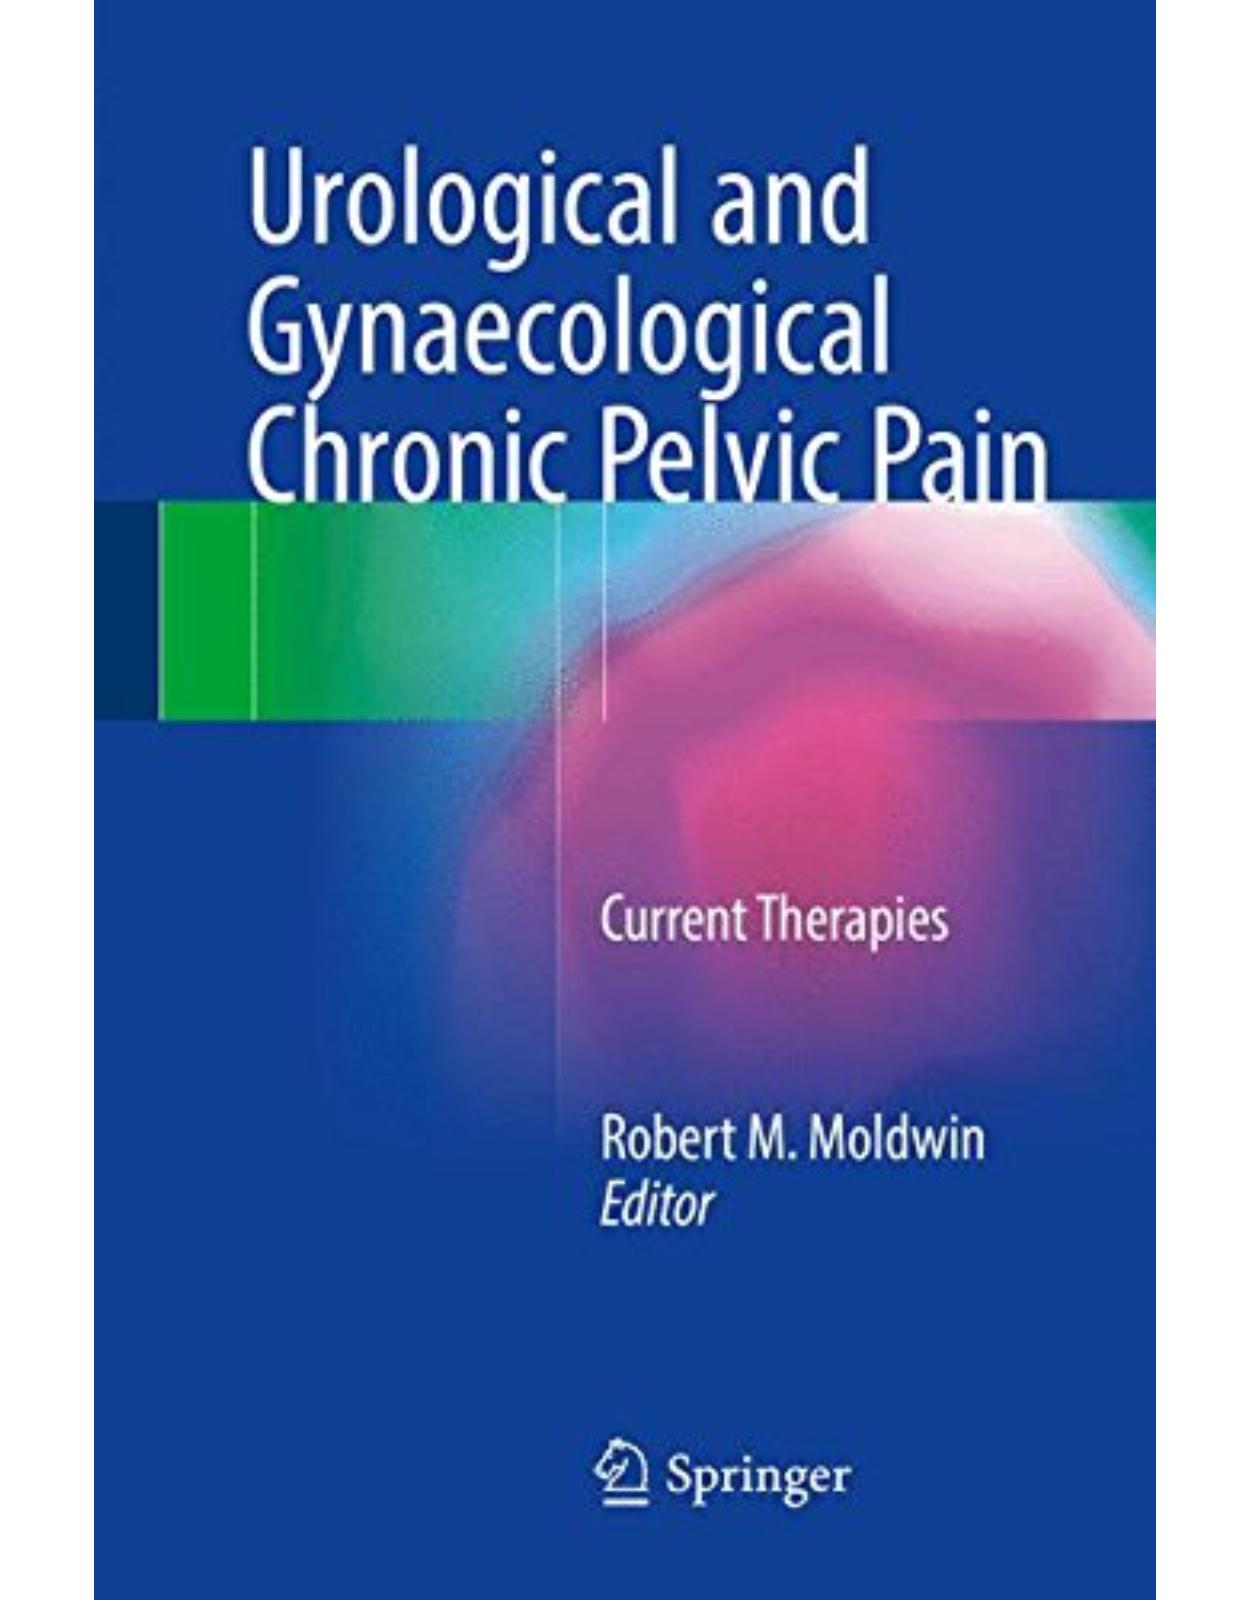 Urological and Gynaecological Chronic Pelvic Pain: Current Therapies